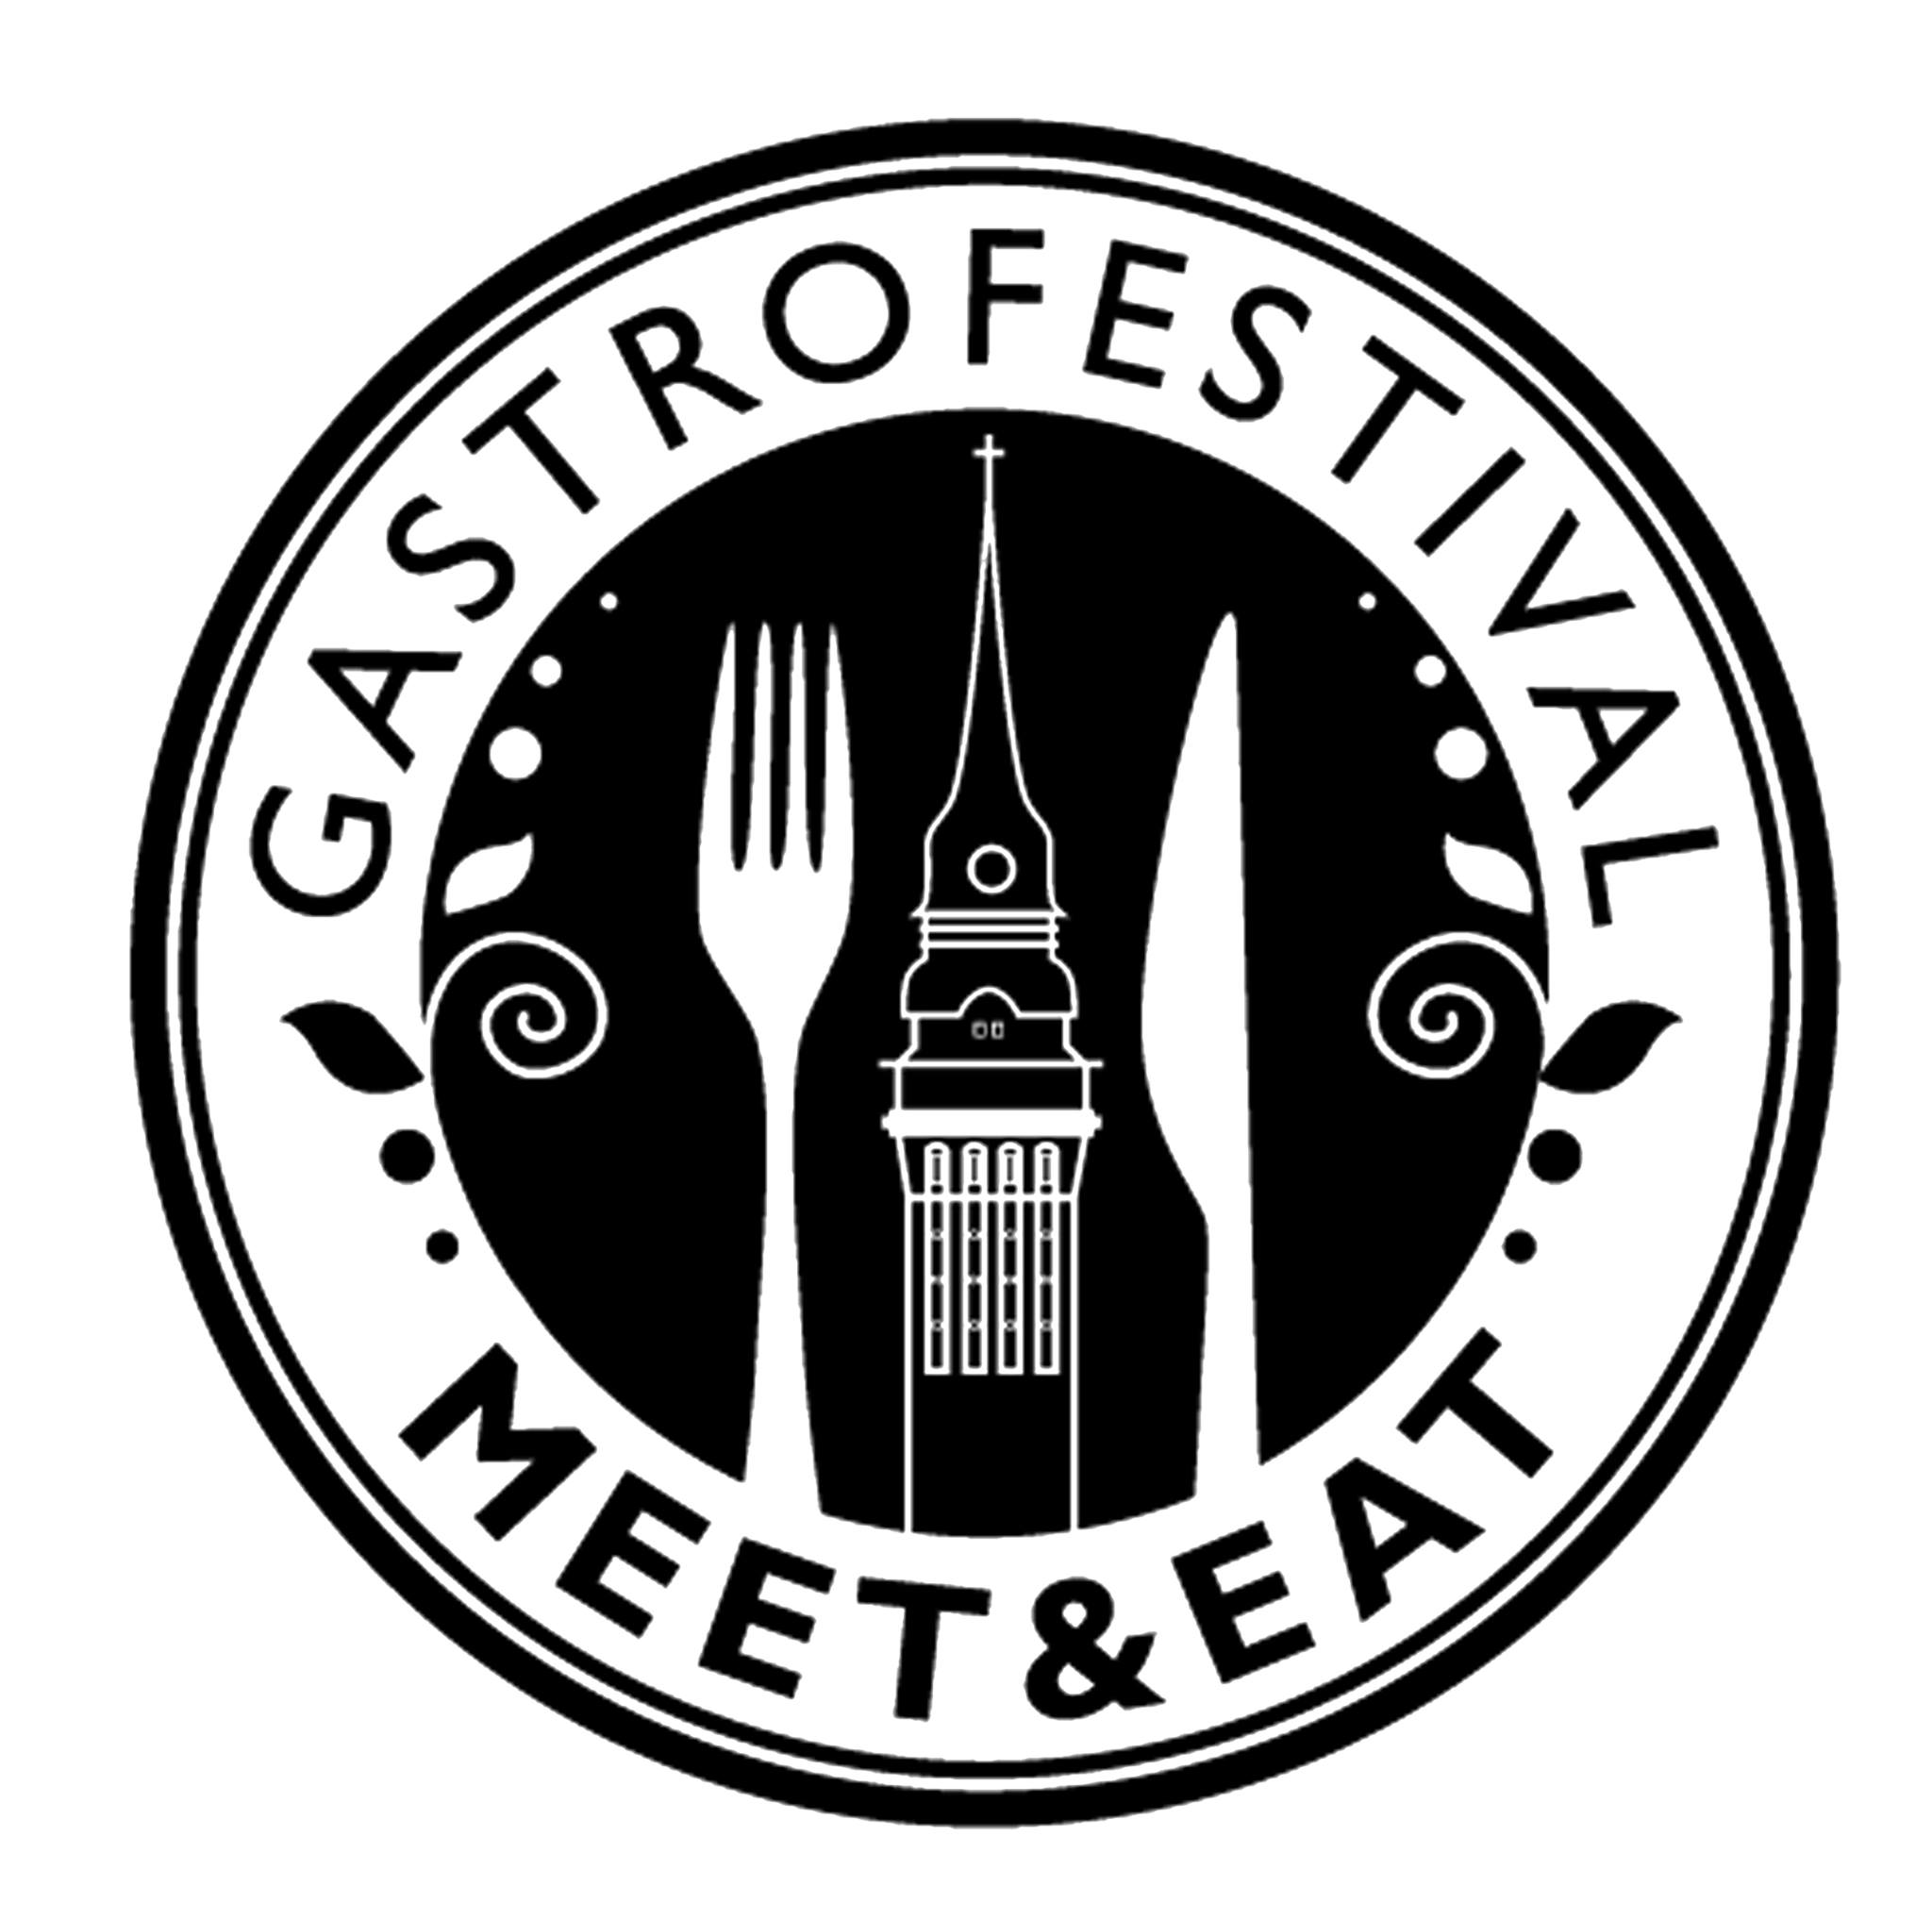 meat and eat logo